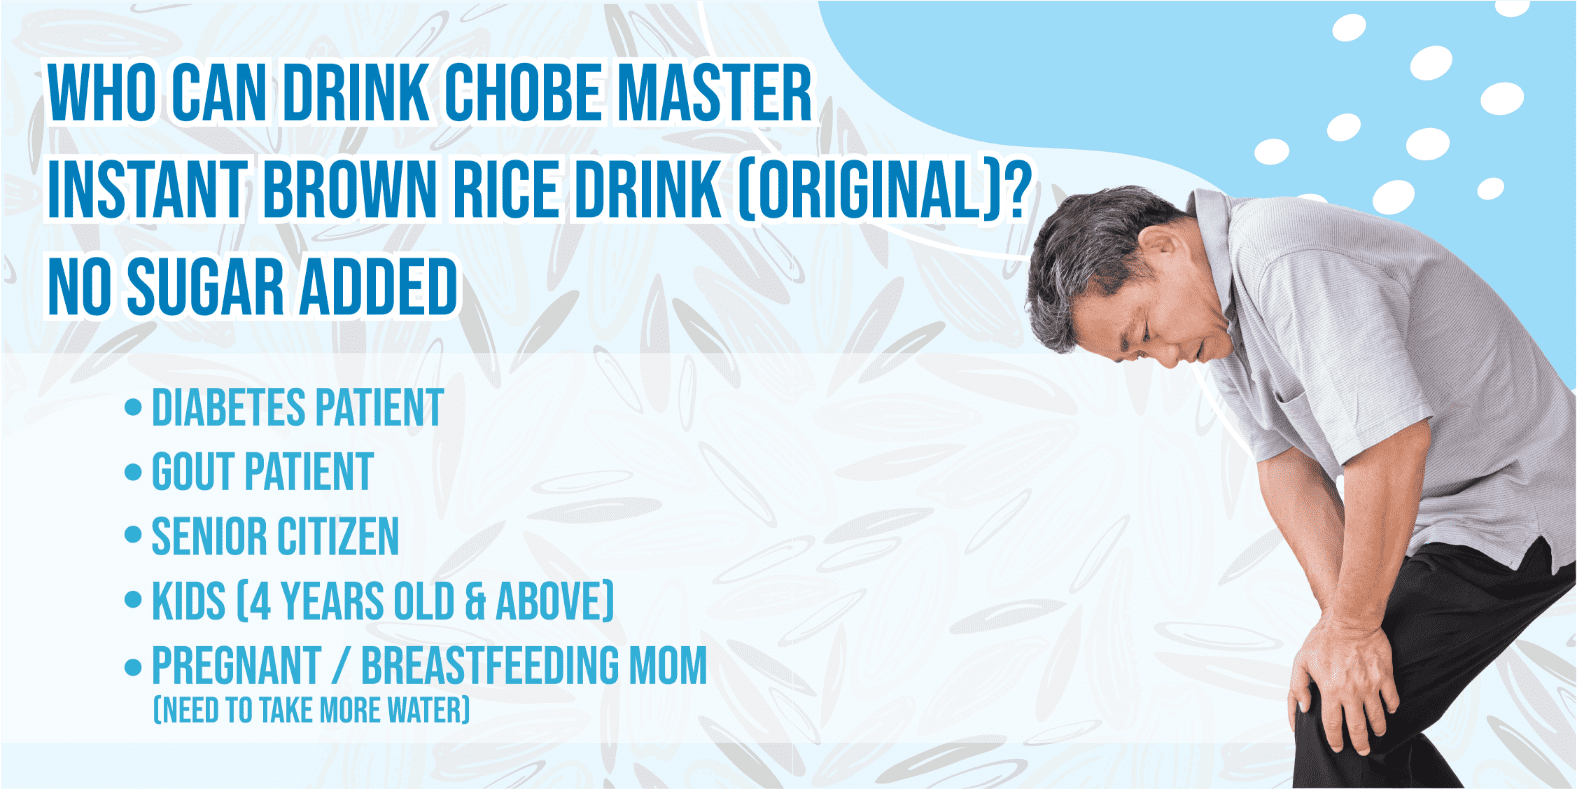 Who can drink Chobe Master Instant Brown Rice Drink Original